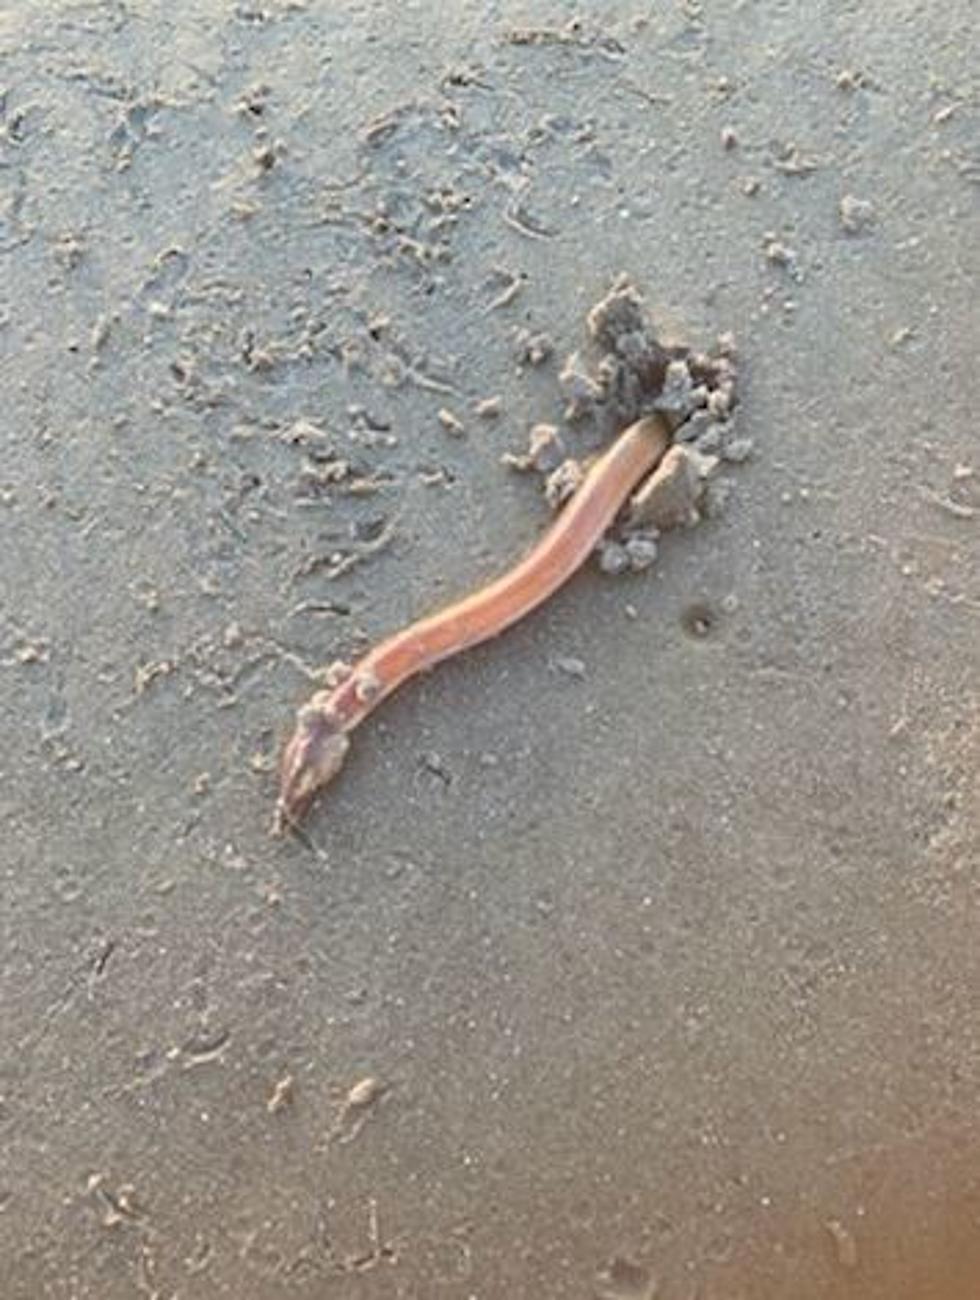 Is This an Alien Species Discovered on a Texas Beach?